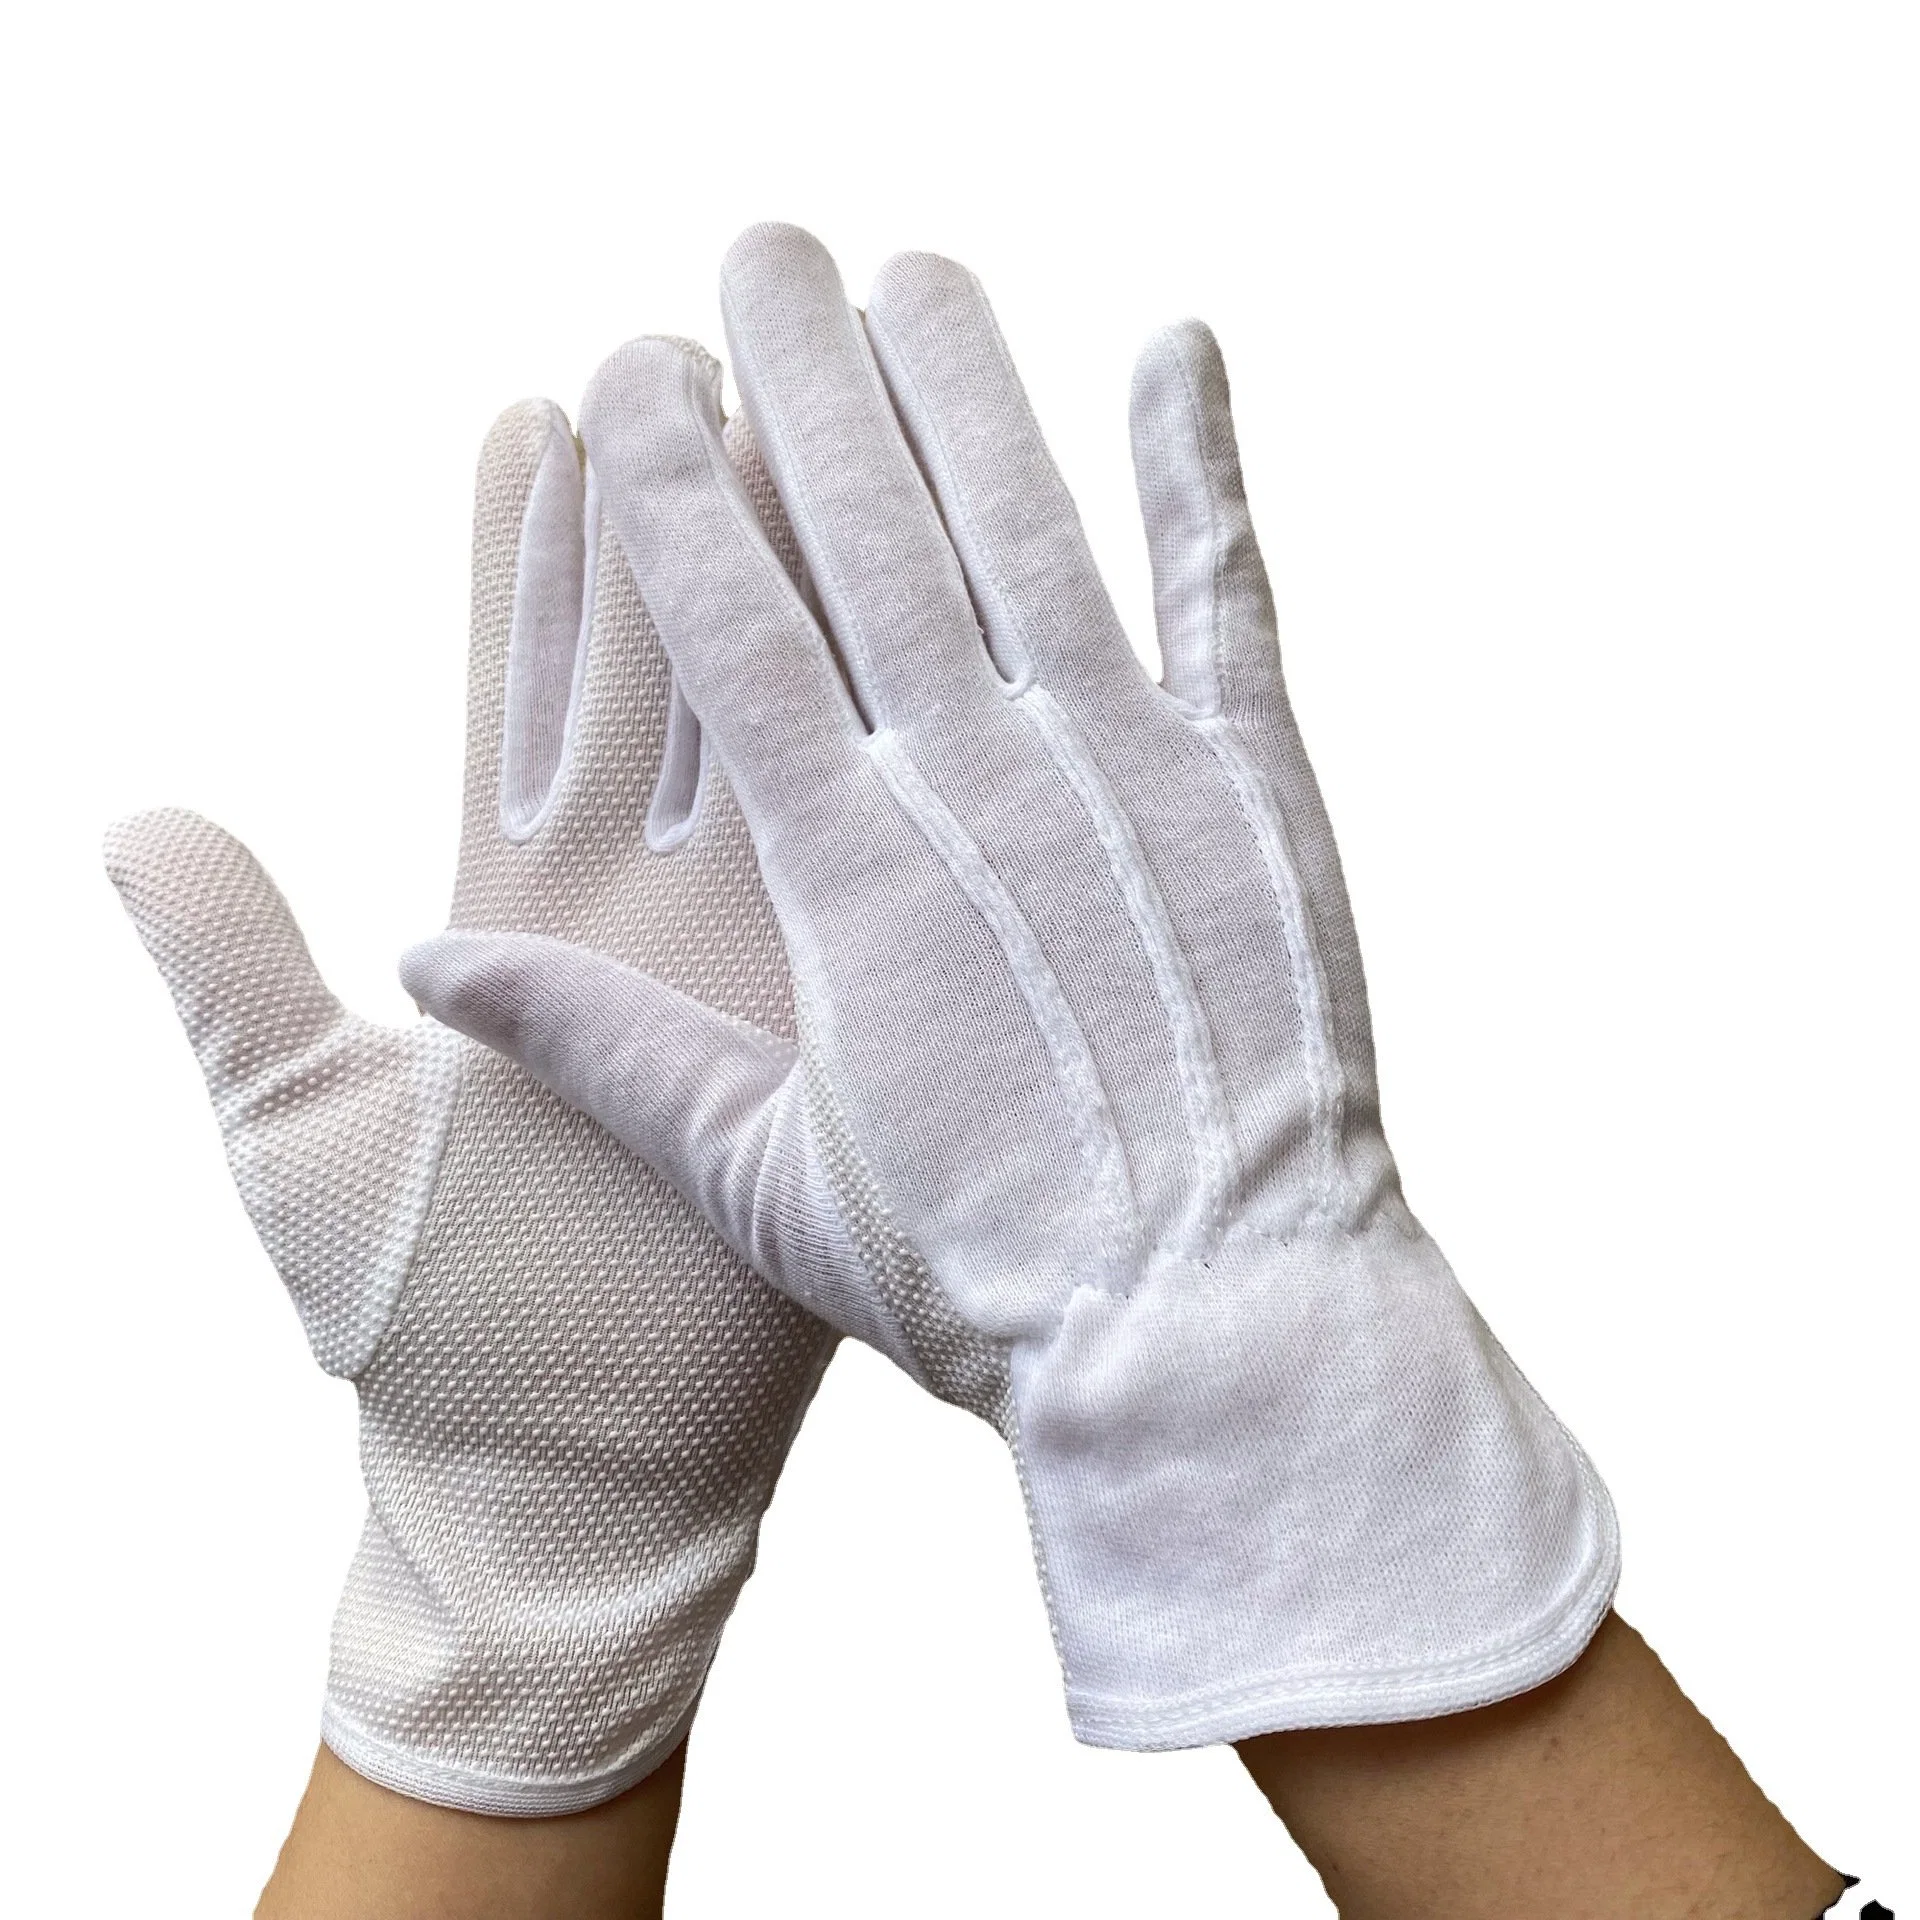 OEM Custom Marching Band White Cotton Gloves Ceremony Cotton Gloves Good Quality Cotton Safety Gloves by Jinlongyuan